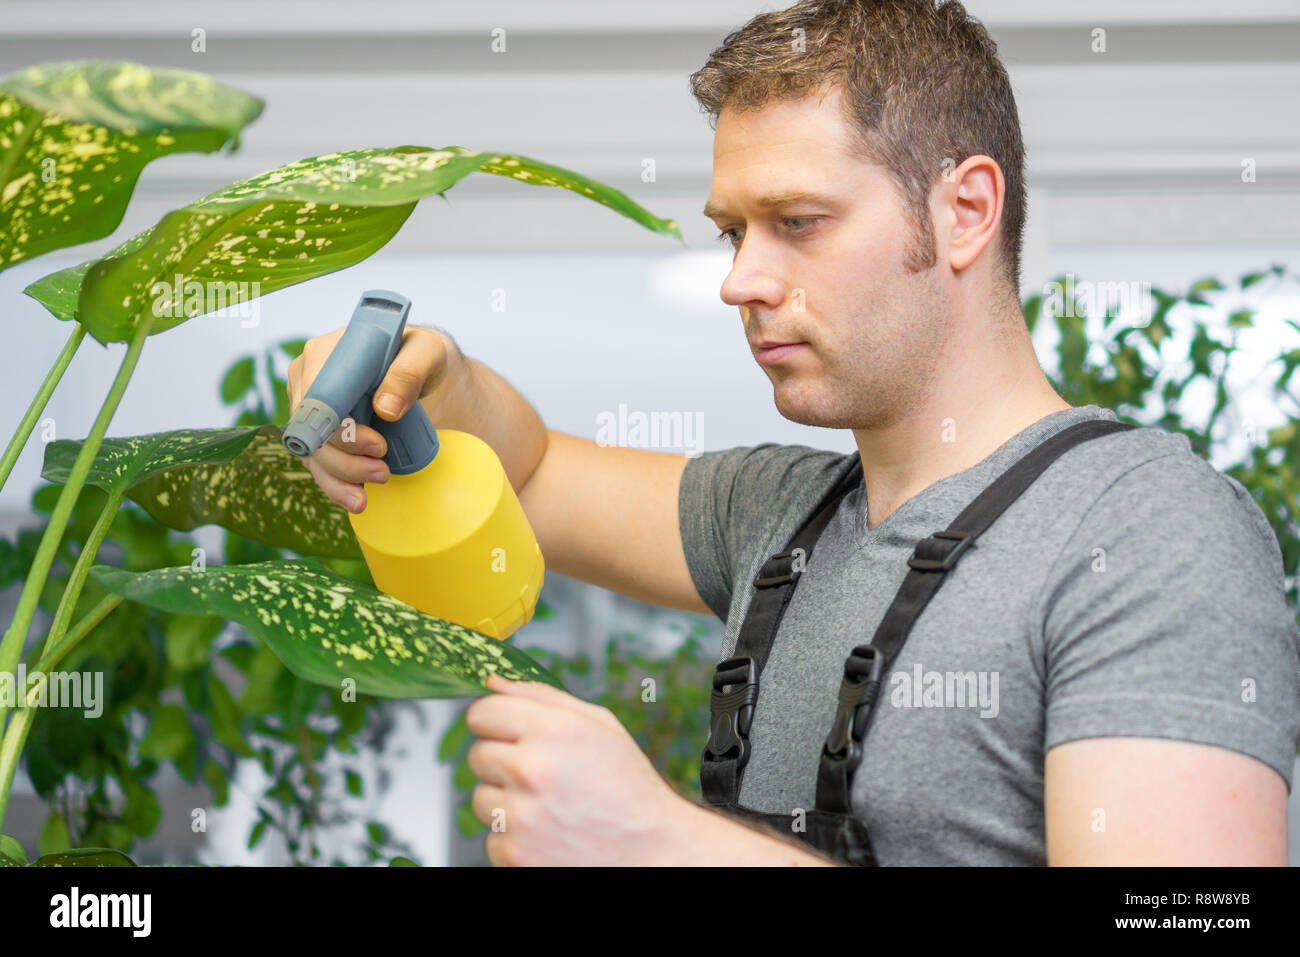 Cleaning service concept. Man caring for flowers at home. Stock Photo